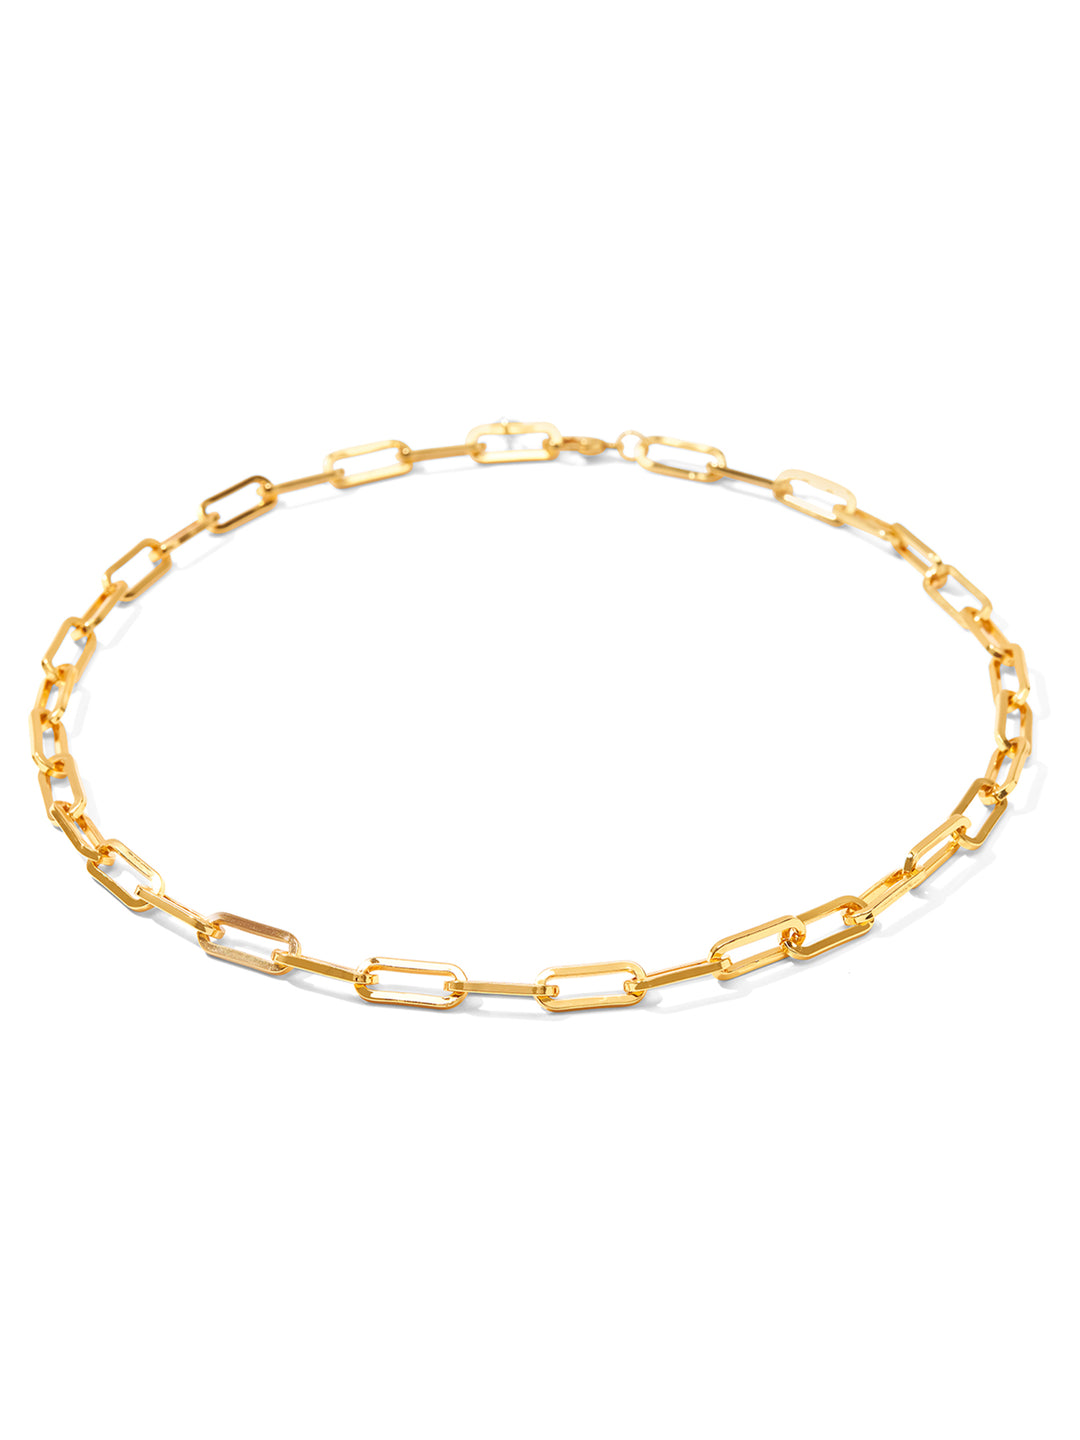 BICYCLE CHAIN • Color: 18K Yellow Gold